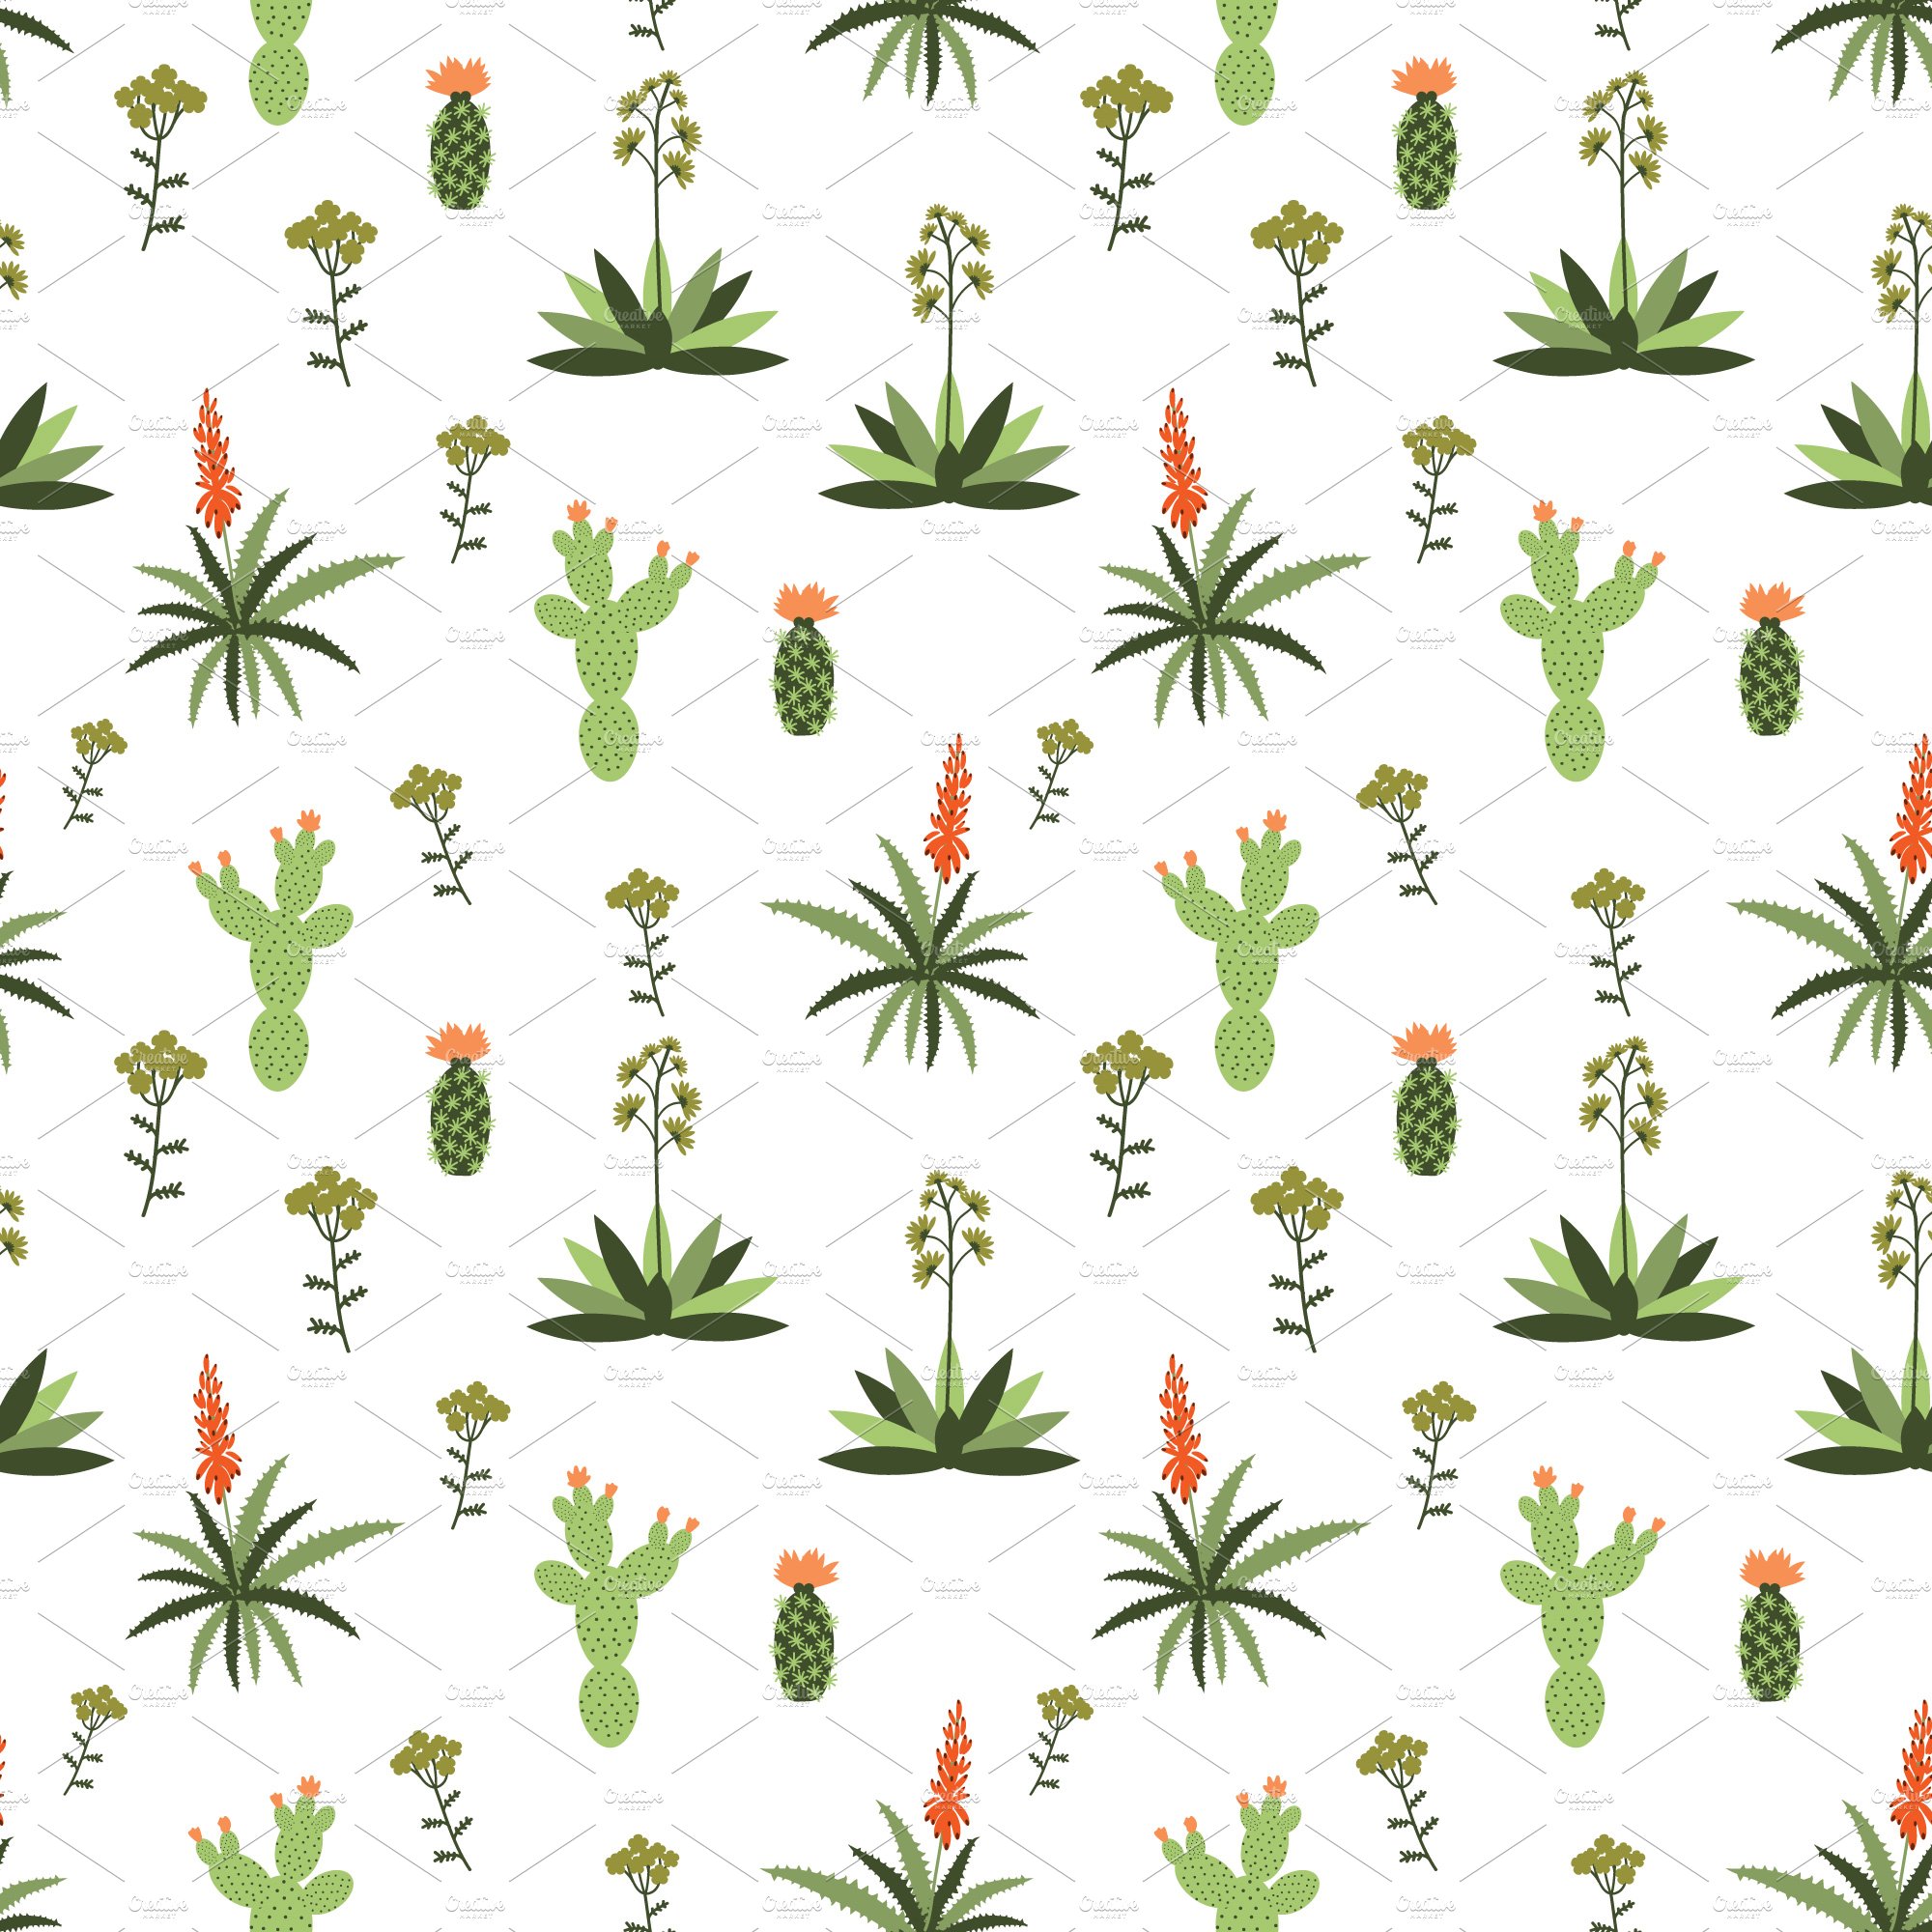 Pattern of plants and flowers on a white background.